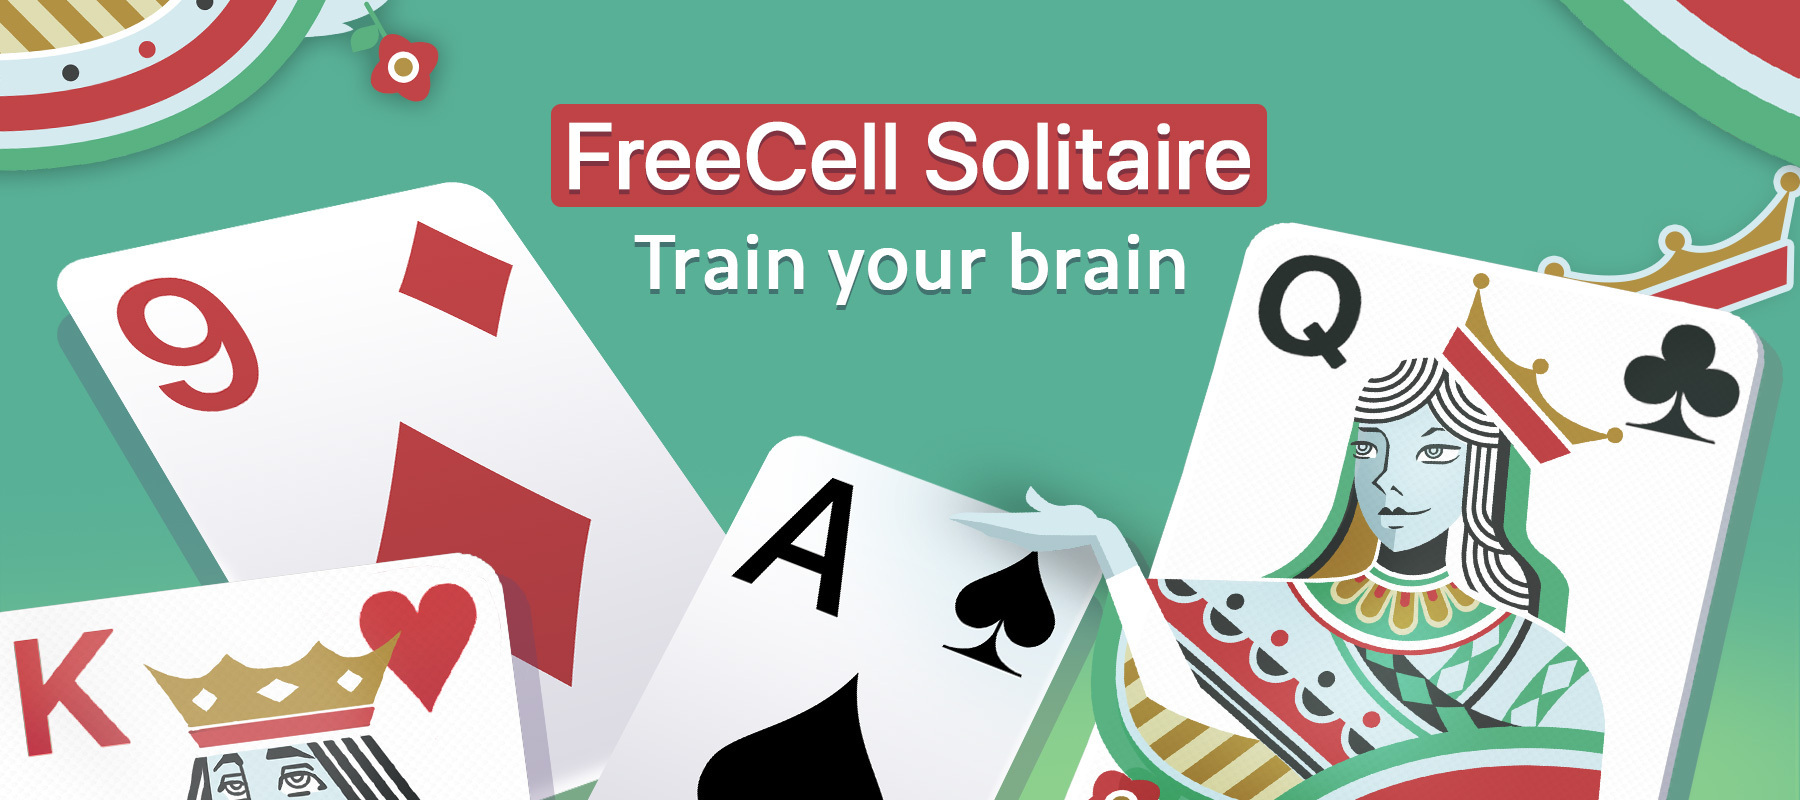 FreeCell Solitaire Hero Image